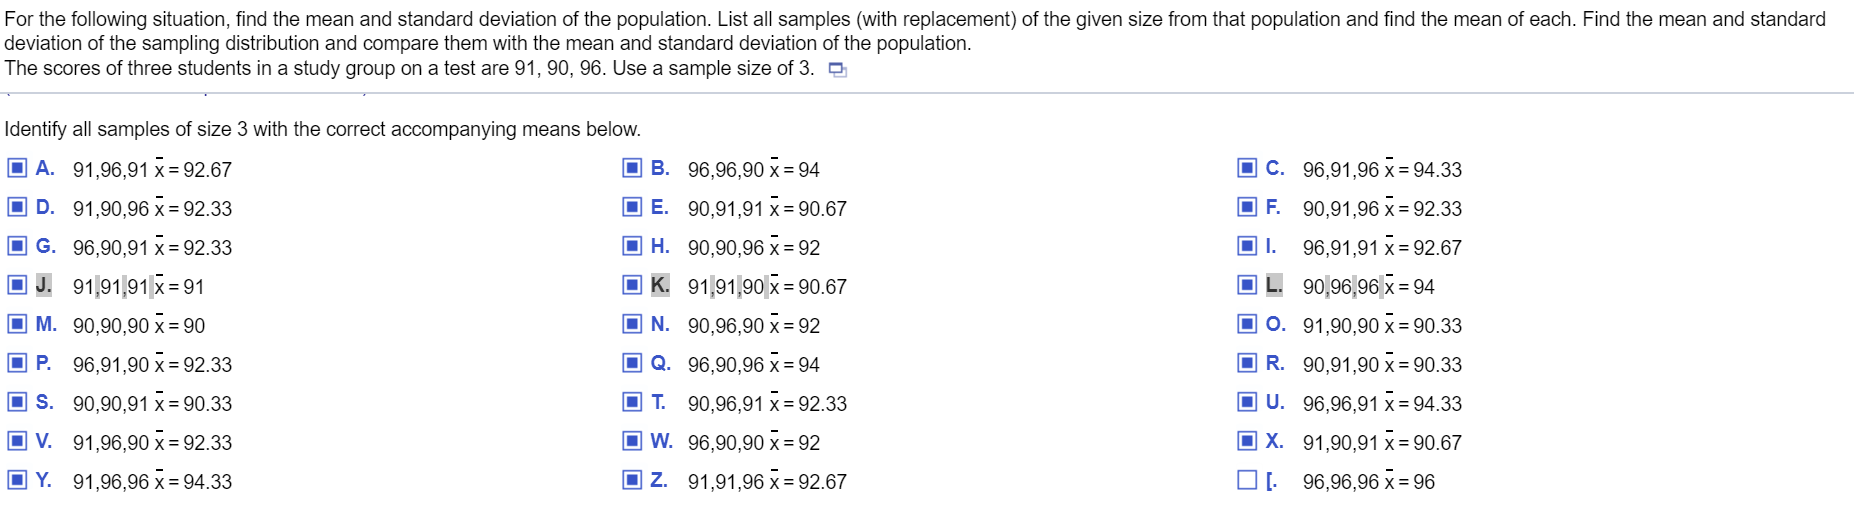 For the following situation, find the mean and standard deviation of the population. List all samples (with replacement) of the given size from that population and find the mean of each. Find the mean and standard
deviation of the sampling distribution and compare them with the mean and standard deviation of the population.
The scores of three students in a study group on a test are 91, 90, 96. Use a sample size of 3. D
Identify all samples of size 3 with the correct accompanying means below.
O A. 91,96,91 x = 92.67
O B. 96,96,90 x = 94
O C. 96,91,96 x = 94.33
D. 91,90,96 x = 92.33
O E. 90,91,91 x = 90.67
F. 90,91,96 x = 92.33
O G. 96,90,91 x = 92.33
O H. 90,90,96 x = 92
OI.
96,91,91 x = 92.67
O J. 91,91,91|x = 91
O K. 91,91,90 x = 90.67
90,96,96| x = 94
M. 90,90,90 x = 90
O N. 90,96,90 x = 92
O 0. 91,90,90 x = 90.33
O P. 96,91,90 x= 92.33
O Q. 96,90,96 x = 94
O R. 90,91,90 x = 90.33
O s. 90,90,91 x = 90.33
OT.
90,96,91 x = 92.33
O U. 96,96,91 x = 94.33
V. 91,96,90 x = 92.33
O W. 96,90,90 x = 92
O X. 91,90,91 x = 90.67
